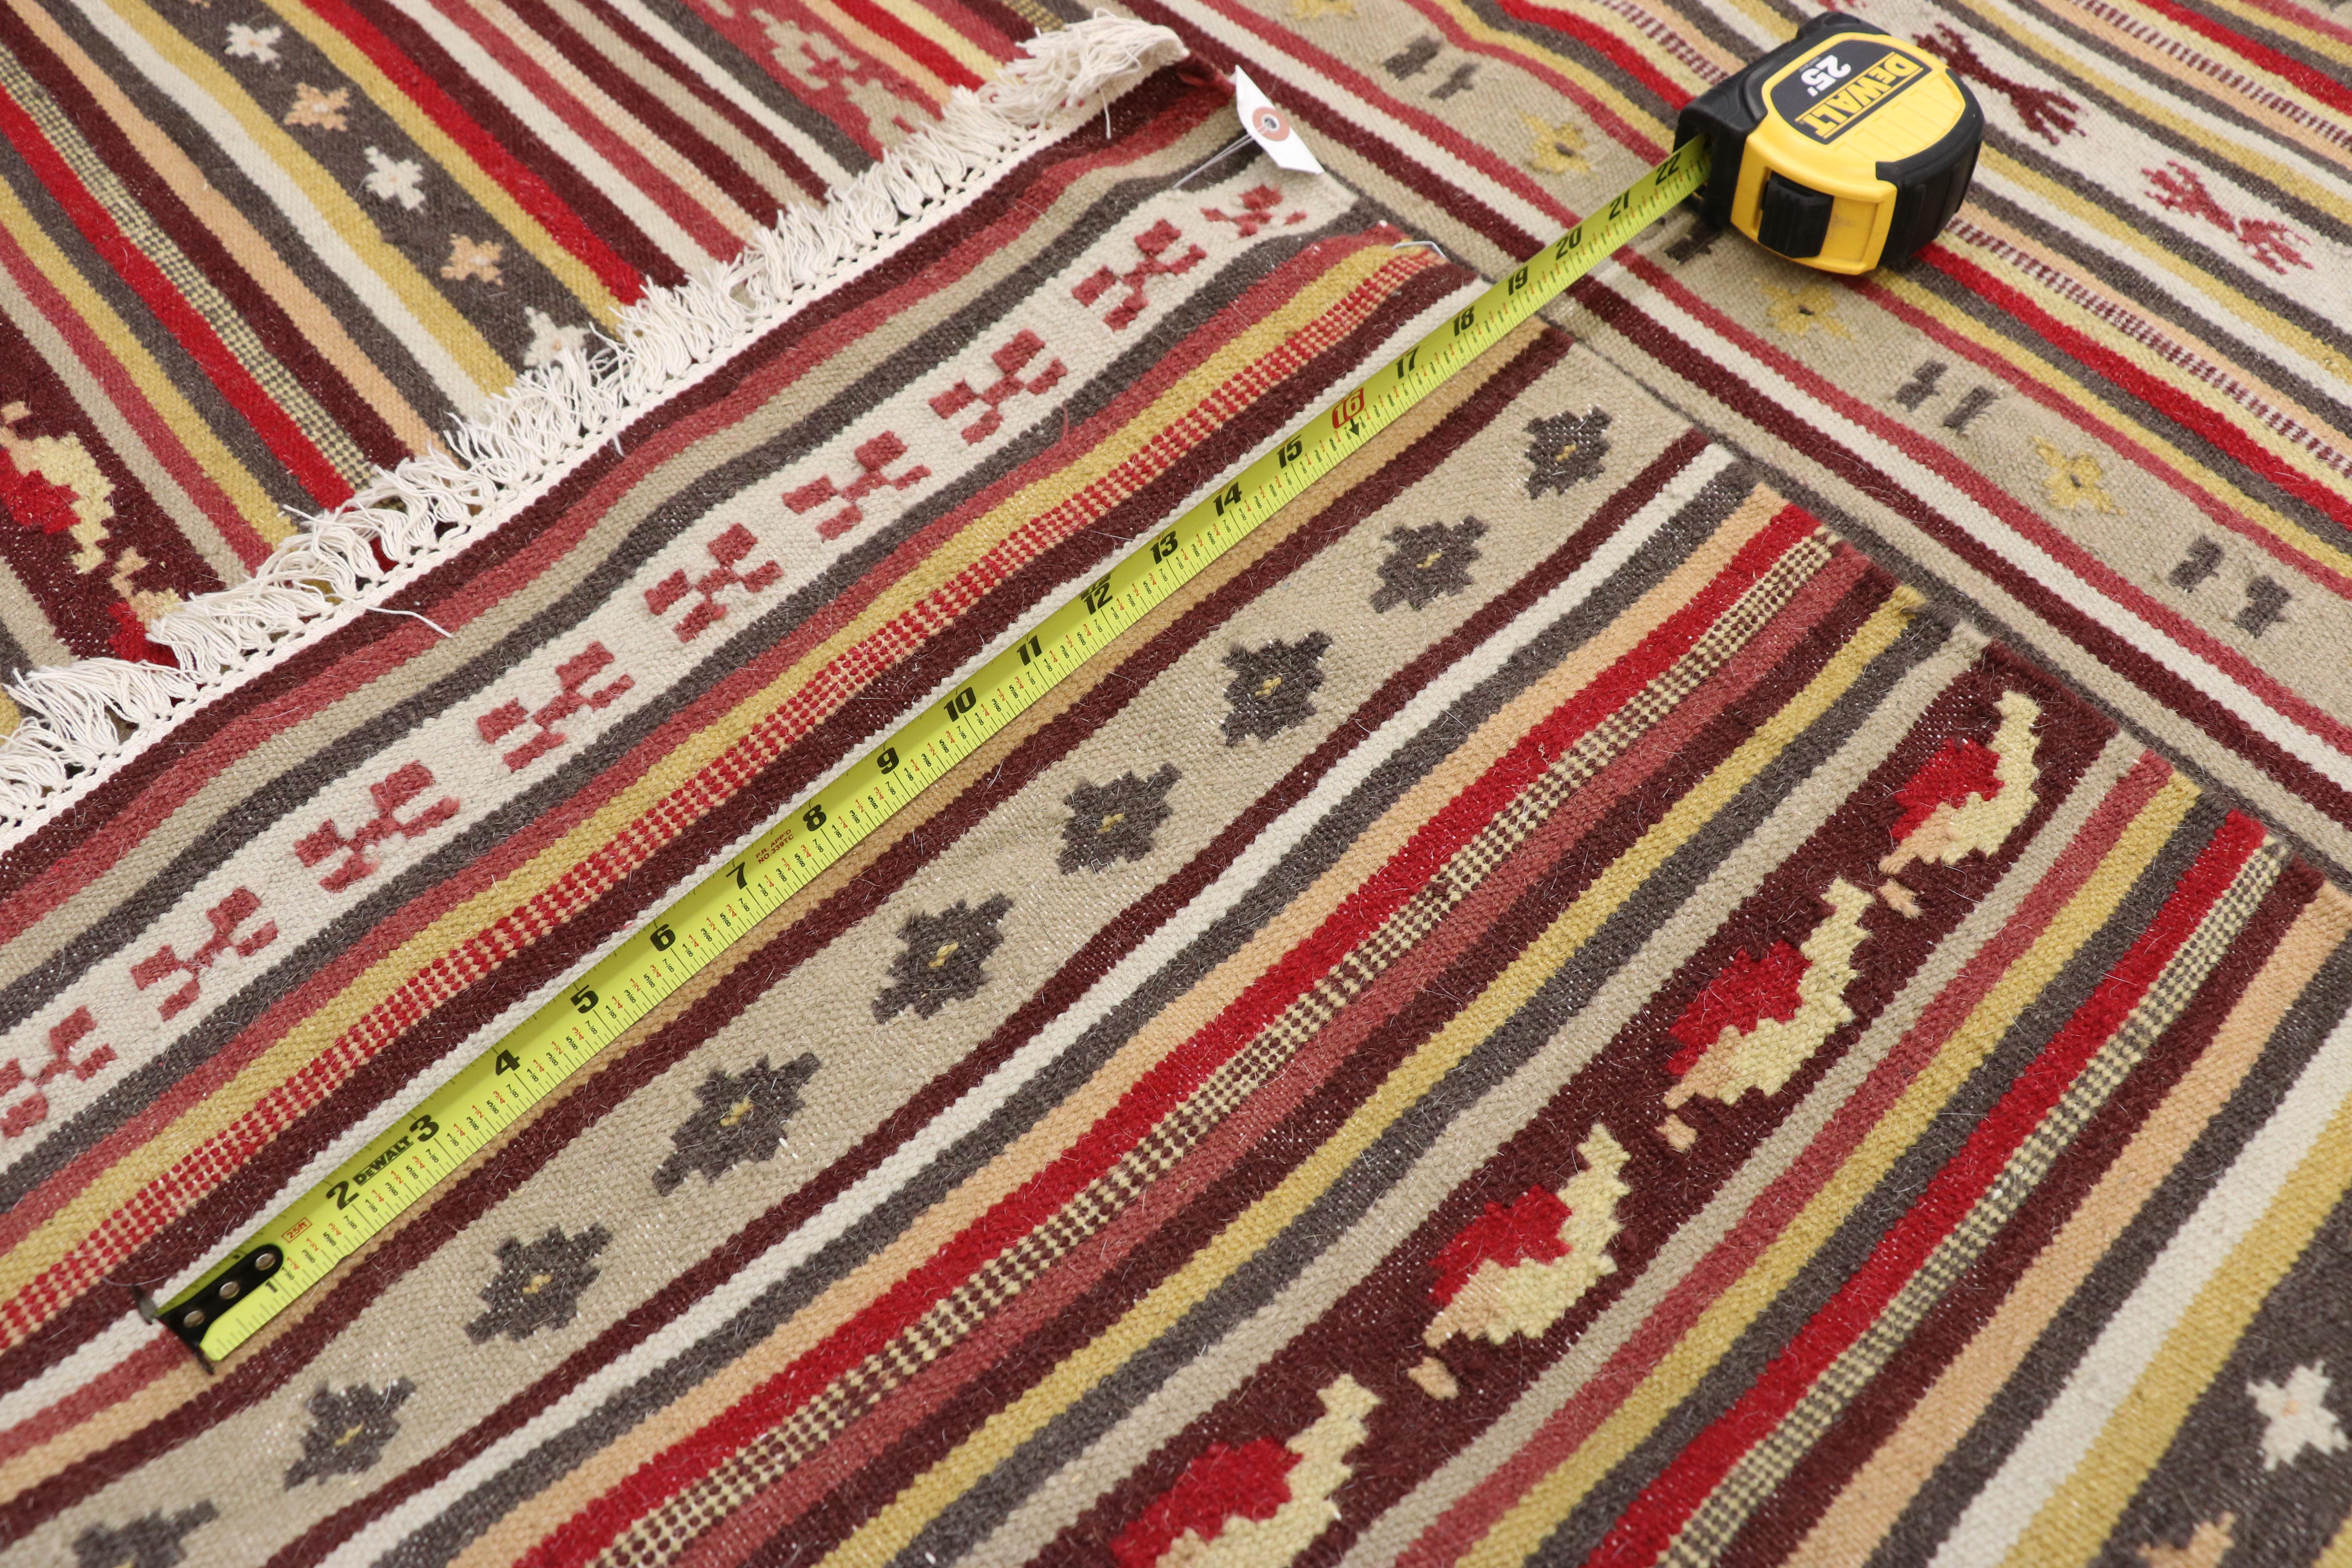 Vintage Turkish Striped Kilim Rug with Tribal Style, Flat-Weave Rug with Stripes For Sale 2